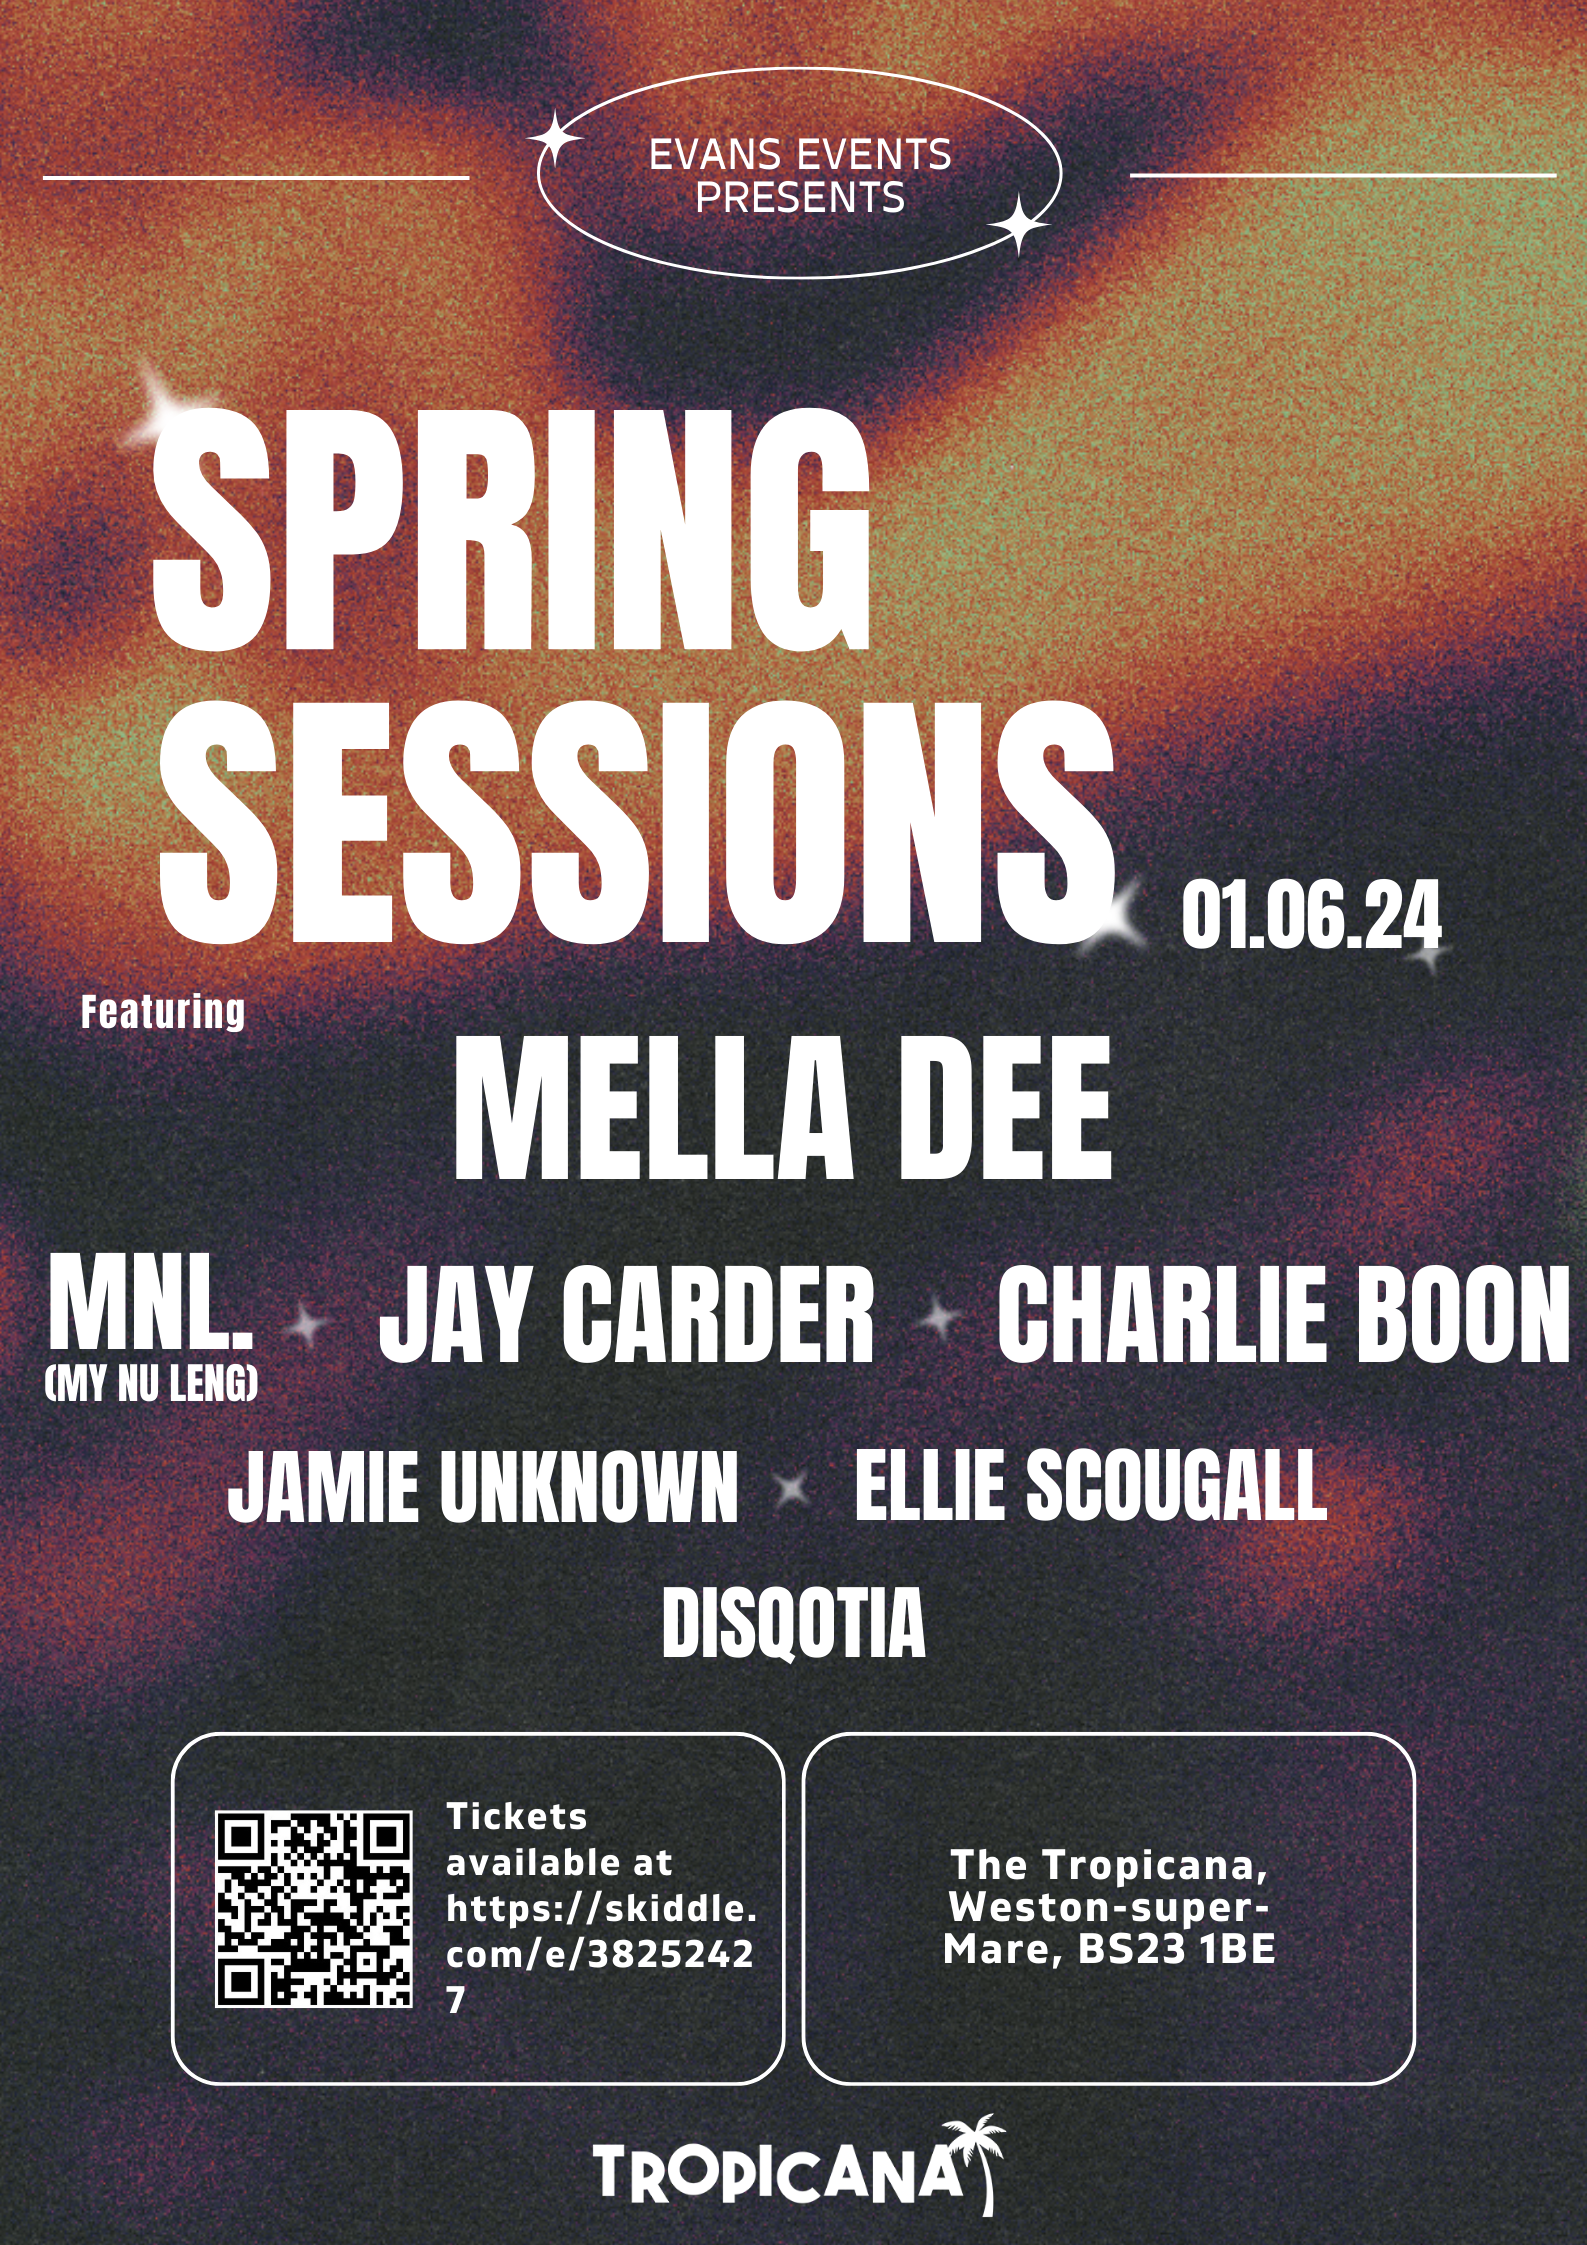 Spring Session with Mella Dee, MNL. and friends - フライヤー表